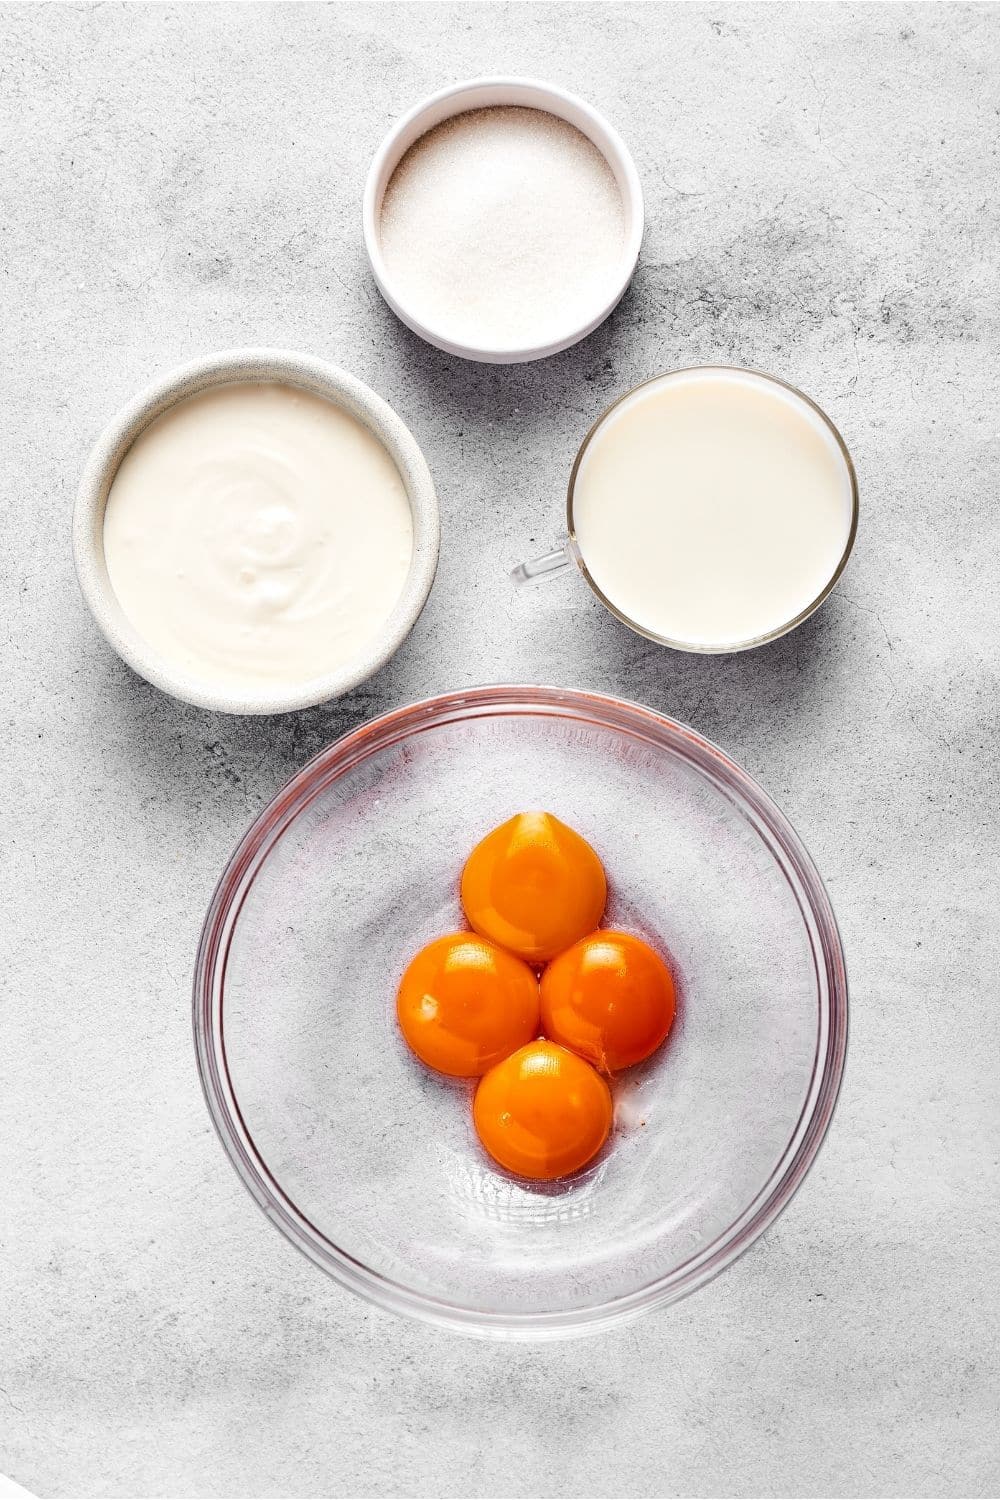 A glass bowls for a yolks in it, a cup of milk, a bowl filled with coconut cream, and a bowl filled with erythritol all on a gray counter.